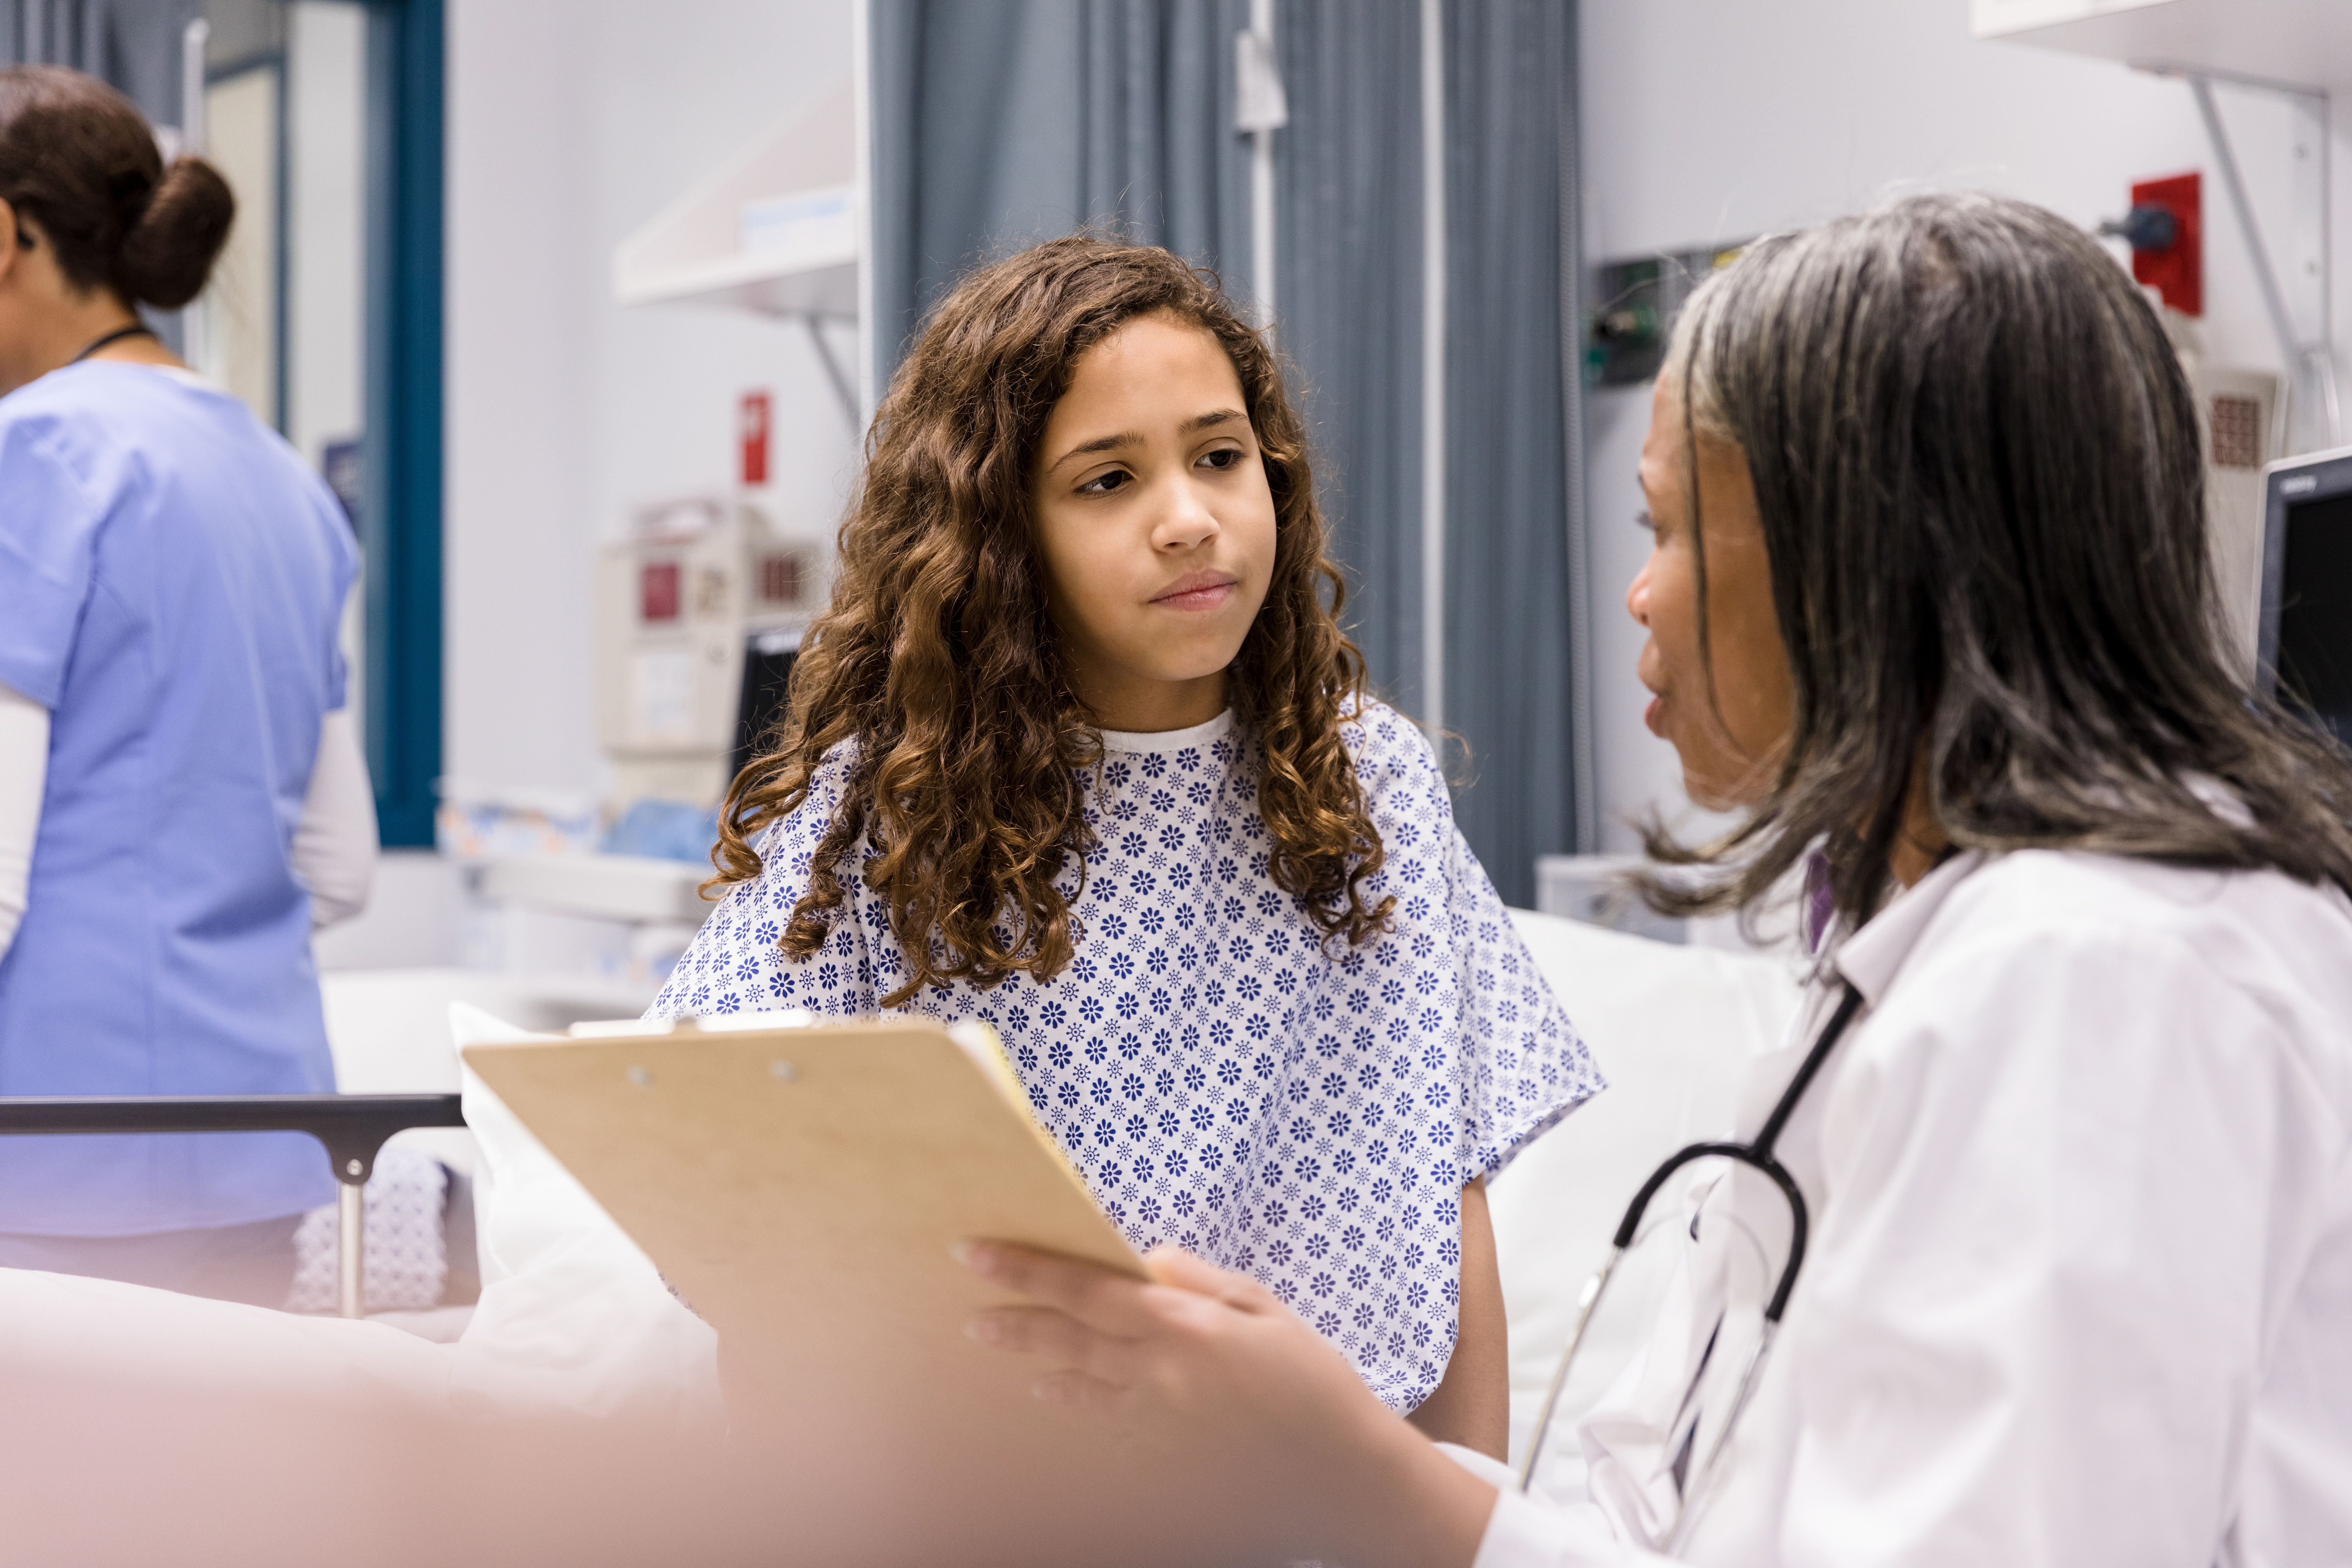 Teen girl listens as doctor explains test results - stock photo